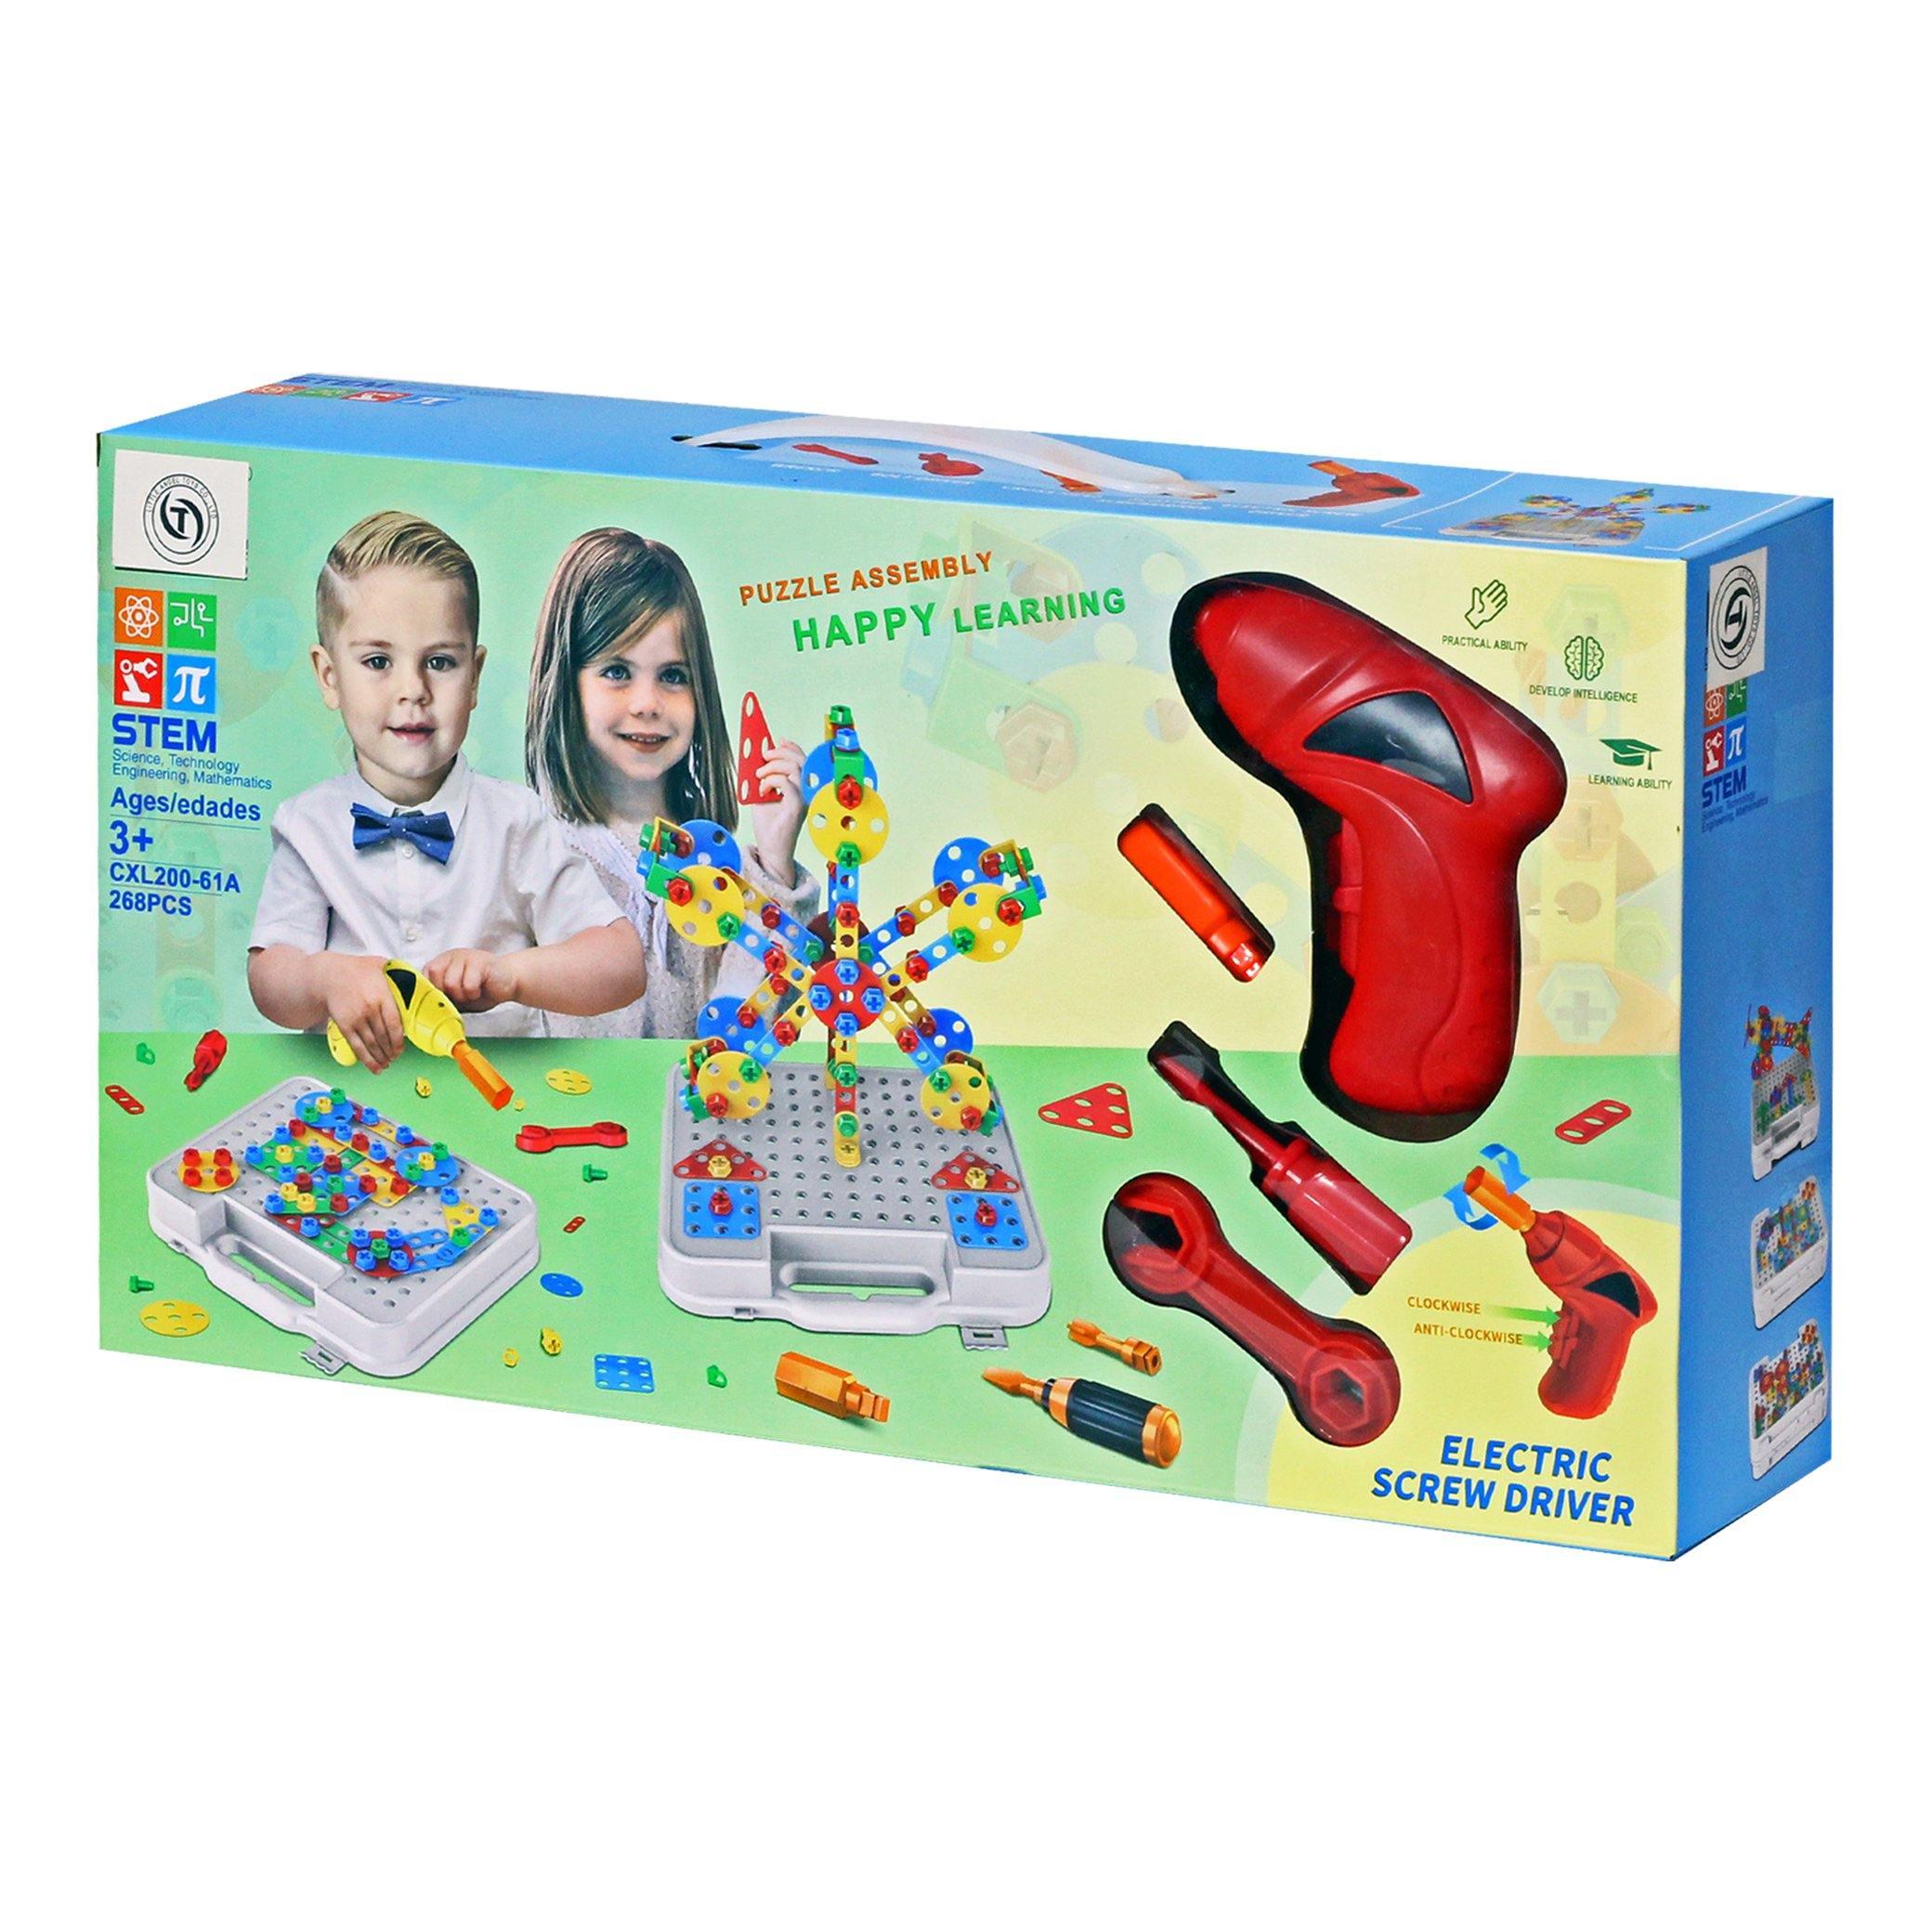 STEM Puzzle Assembely Happy Learning Toy 268 Pieces - BumbleToys - 5-7 Years, Building Sets & Blocks, Toy House, Unisex